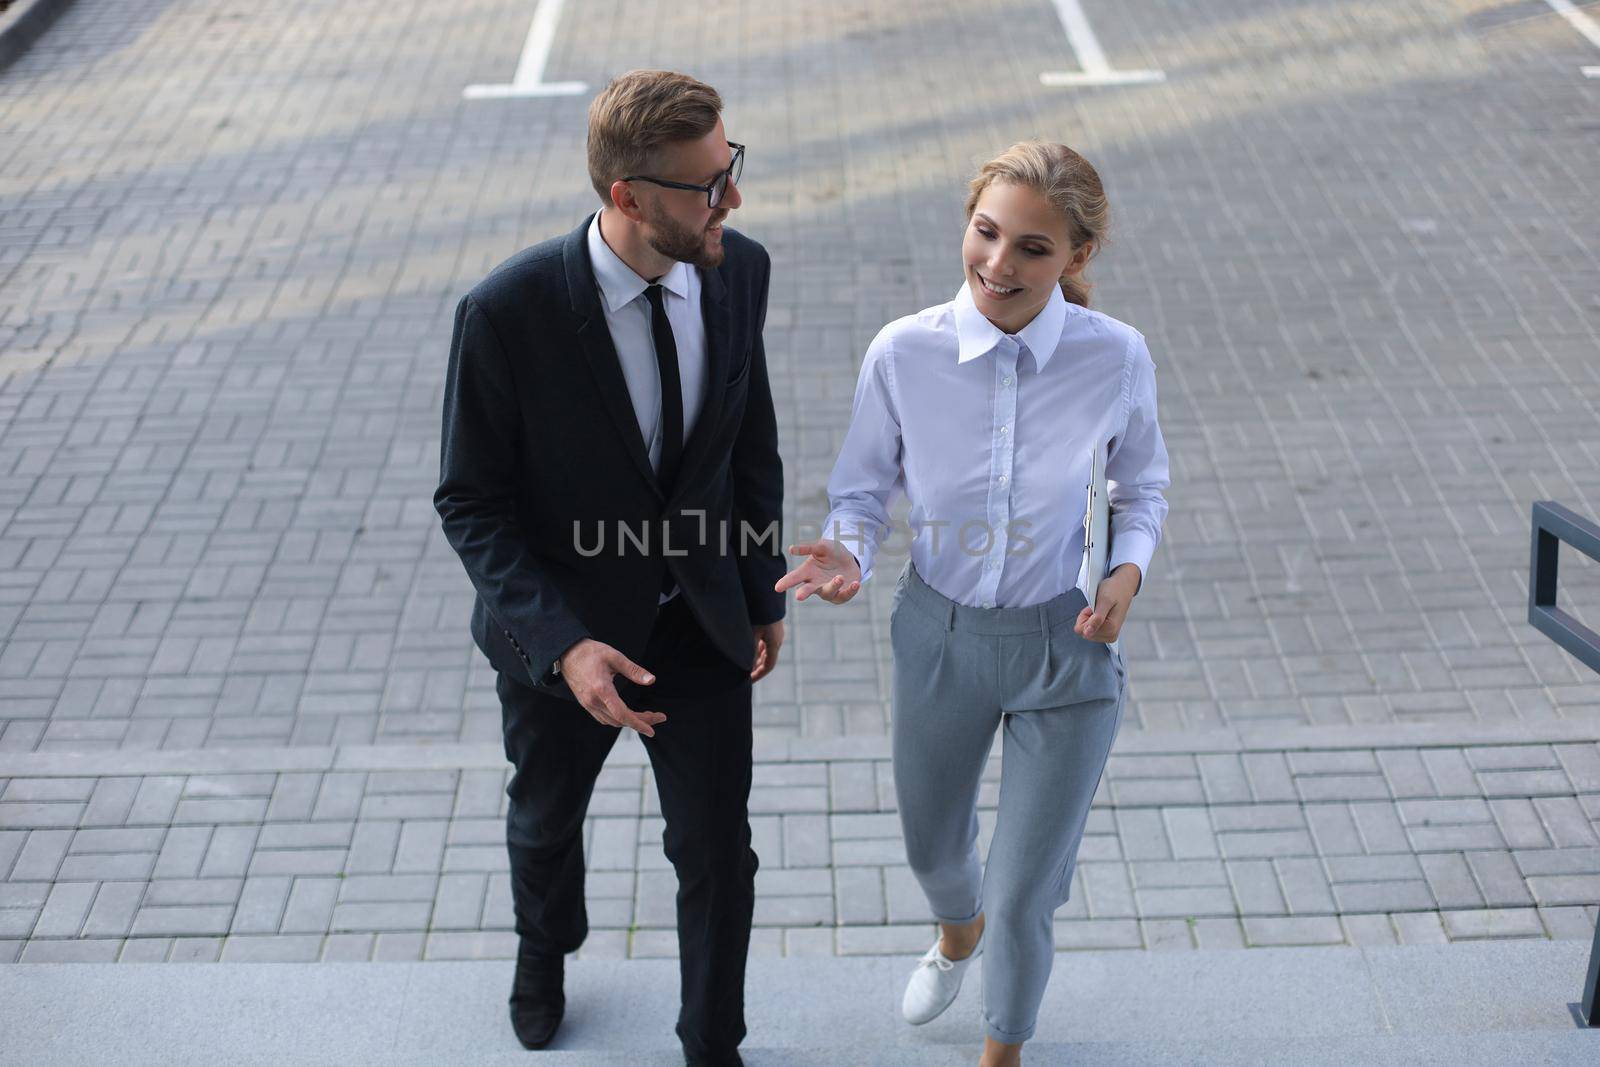 Business man and woman walking in the office center